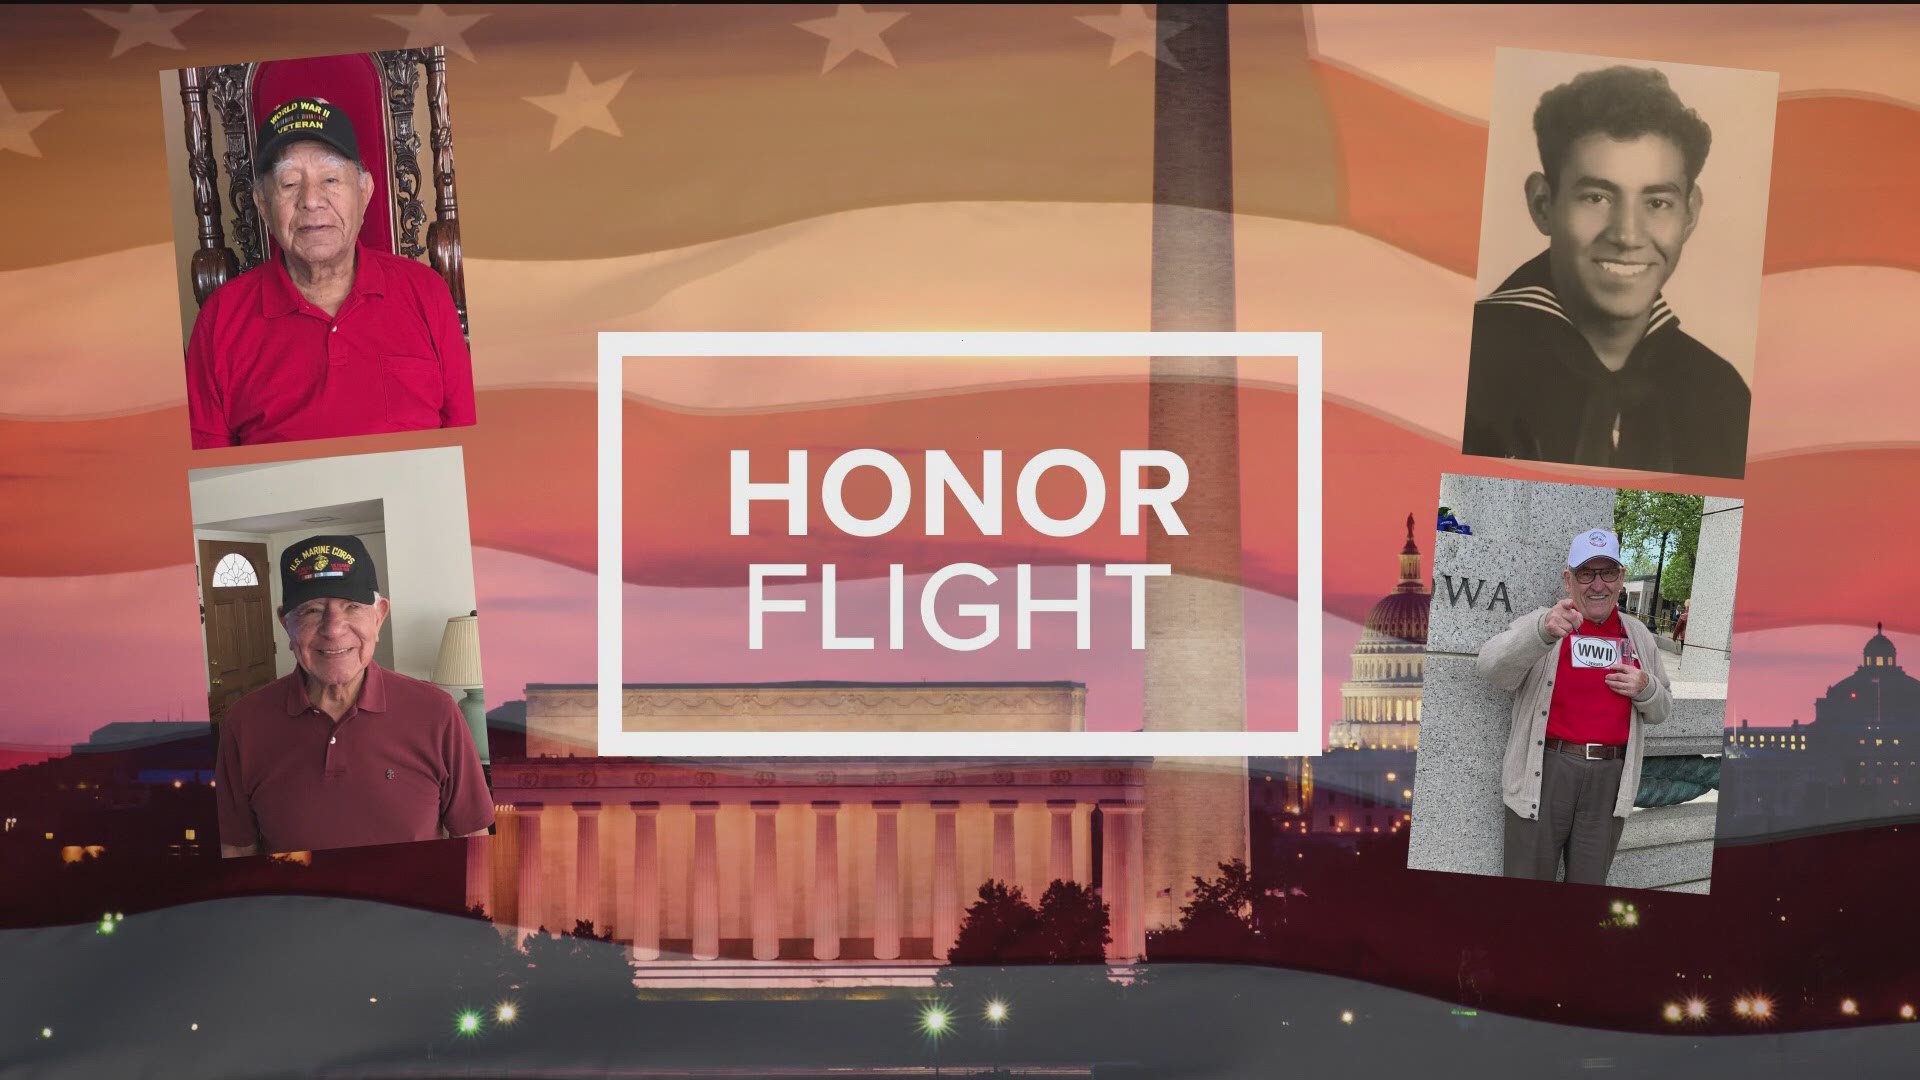 The most recent Honor Flight San Diego had 83 veterans - each with their own remarkable story.